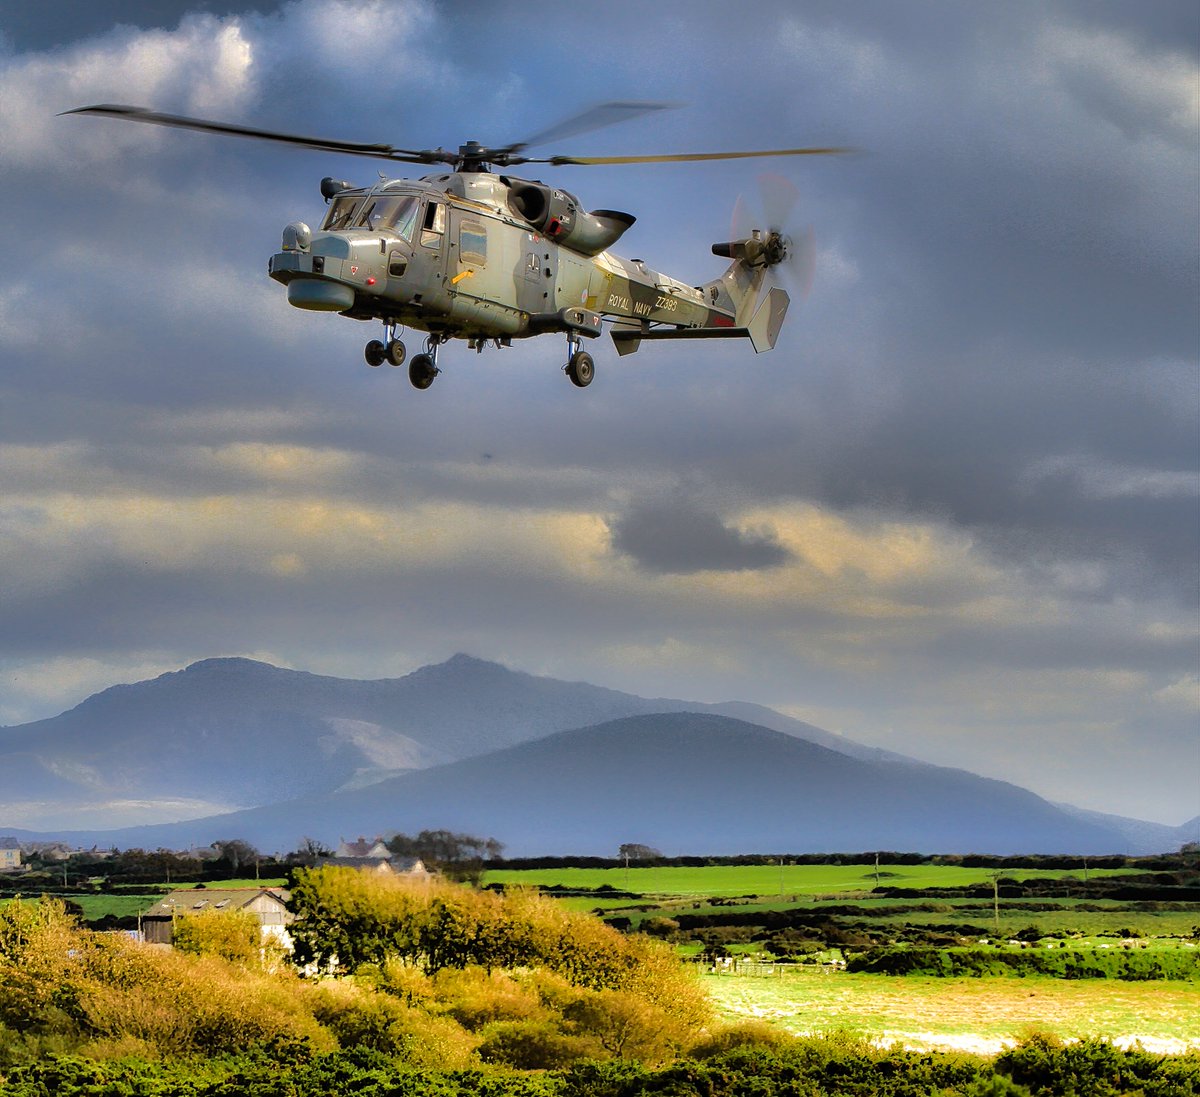 #StrikeDeep #FlyNavy @RNASYeovilton @815NAS  @825NAS @847NAS @AngleseyScMedia @RAF_Valley @RAFValleySafety Mount Snowdon in the backdrop from a Royal Navy training sortie last year #rafvalley #Anglesey #Wales (click for full image)